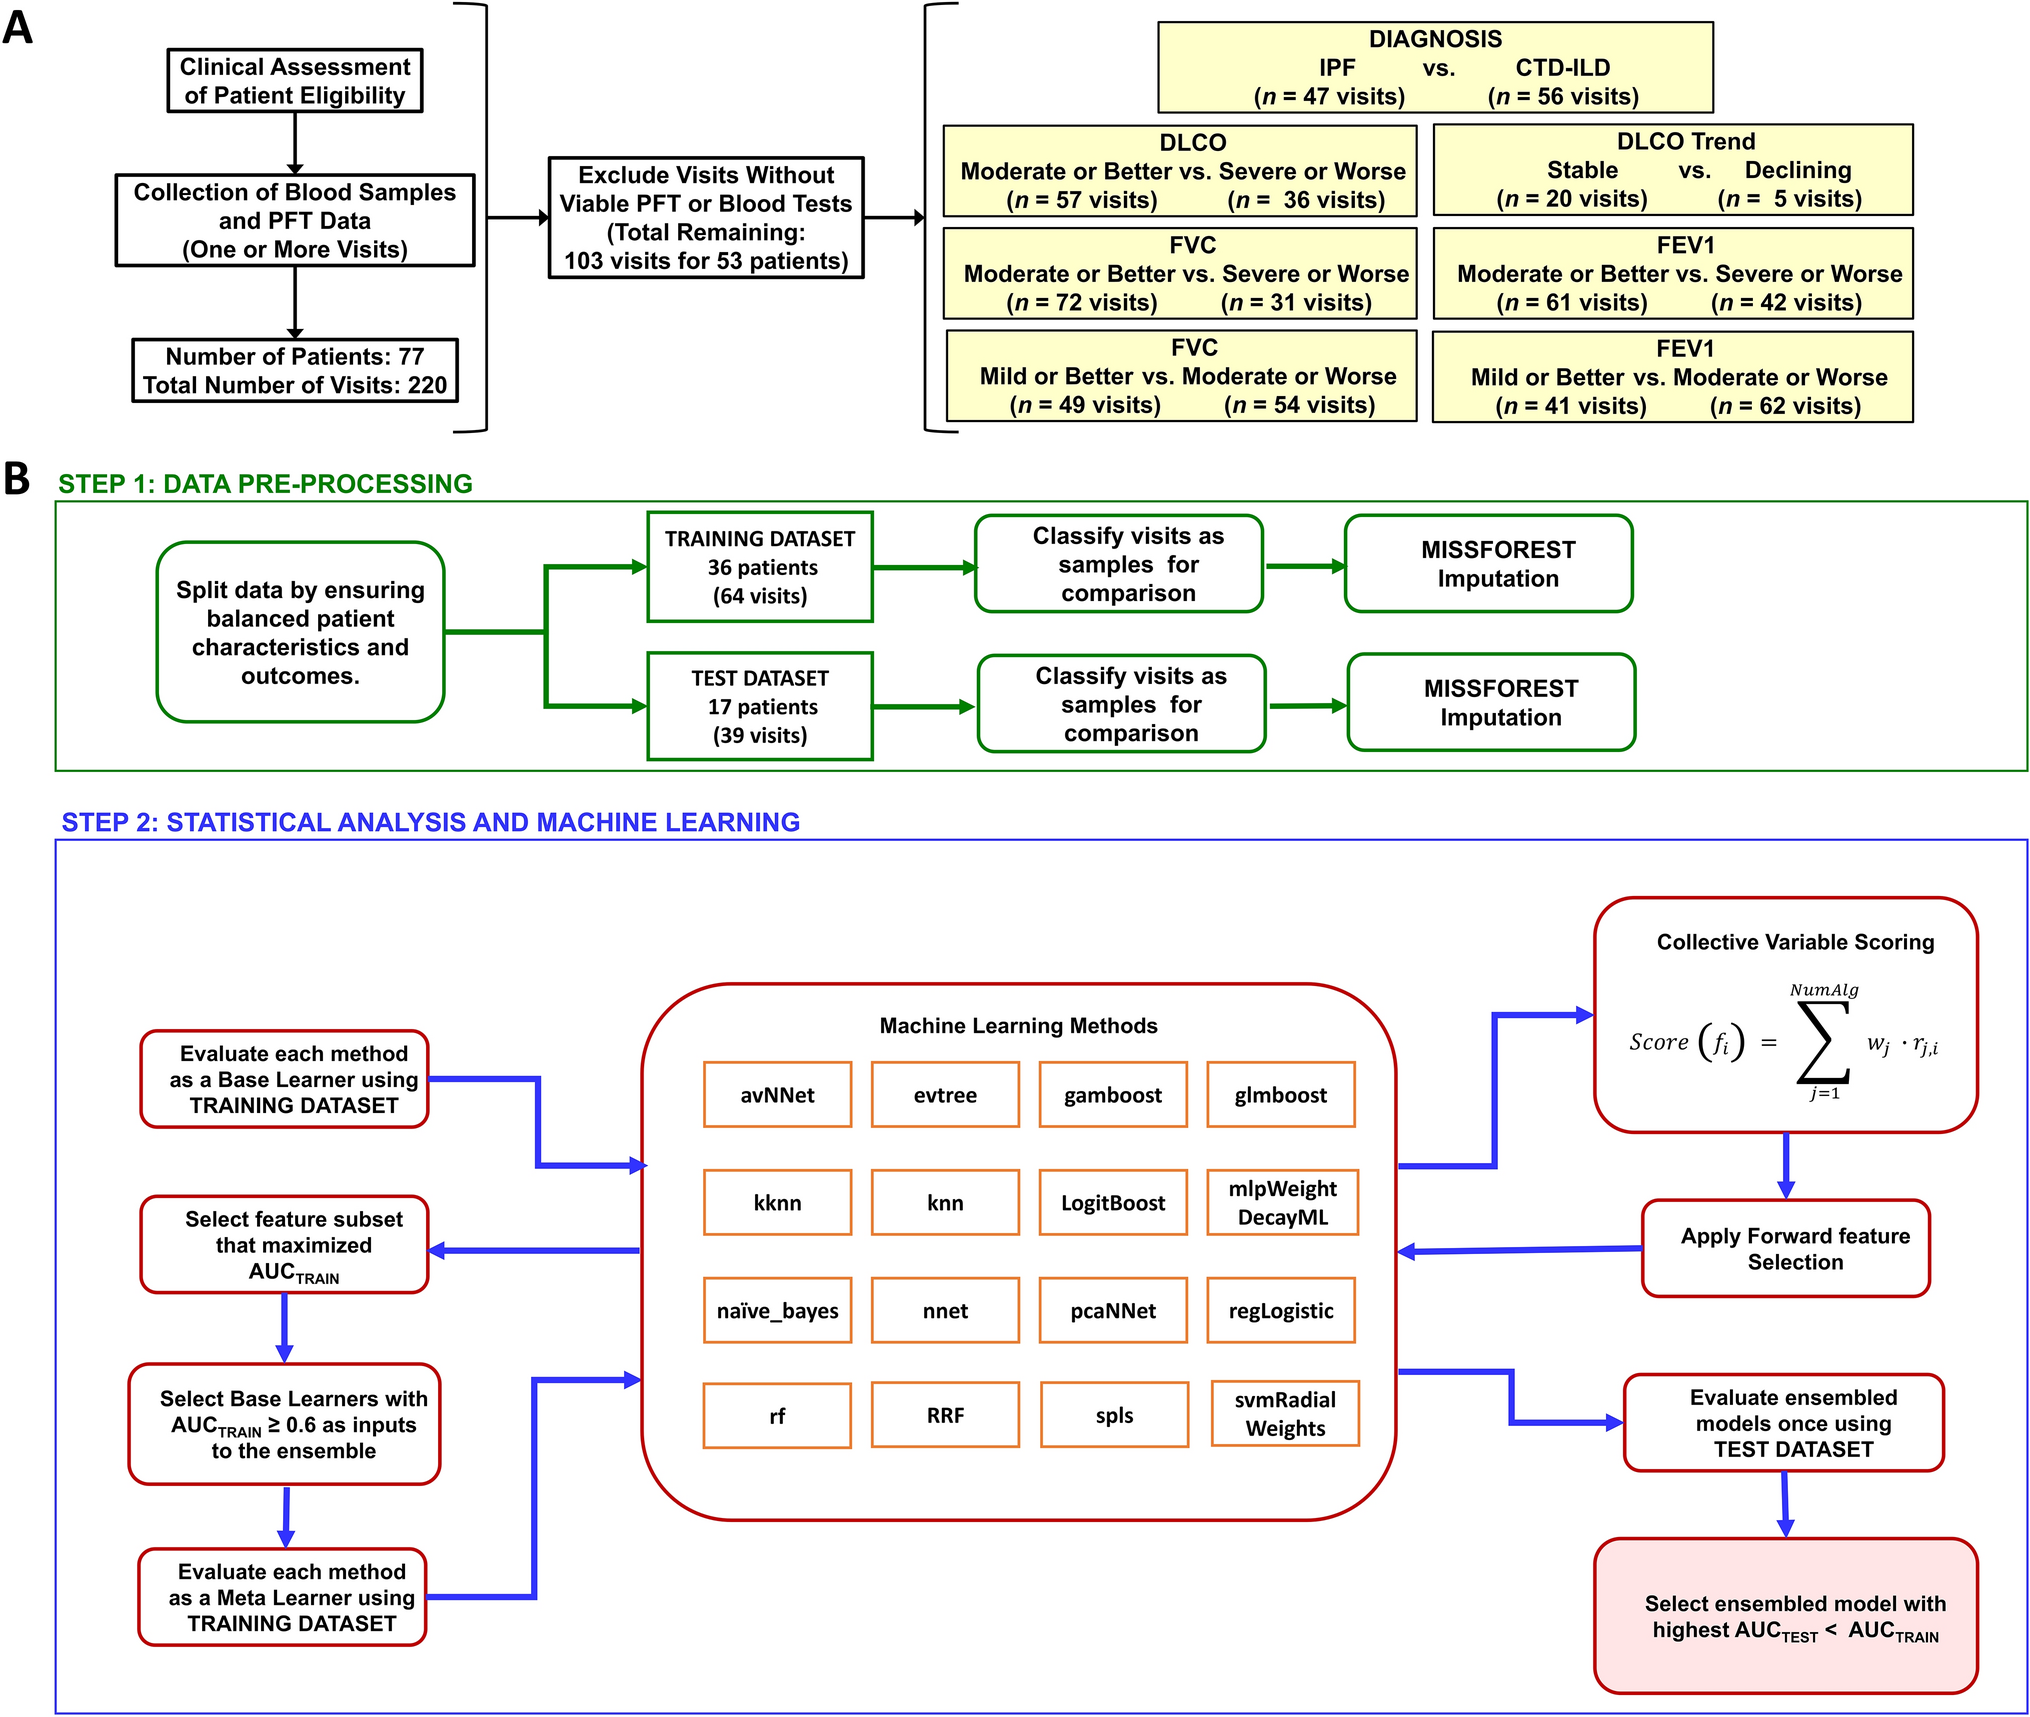 Identification of Idiopathic Pulmonary Fibrosis and Prediction of Disease Severity via Machine Learning Analysis of Comprehensive Metabolic Panel and Complete Blood Count Data